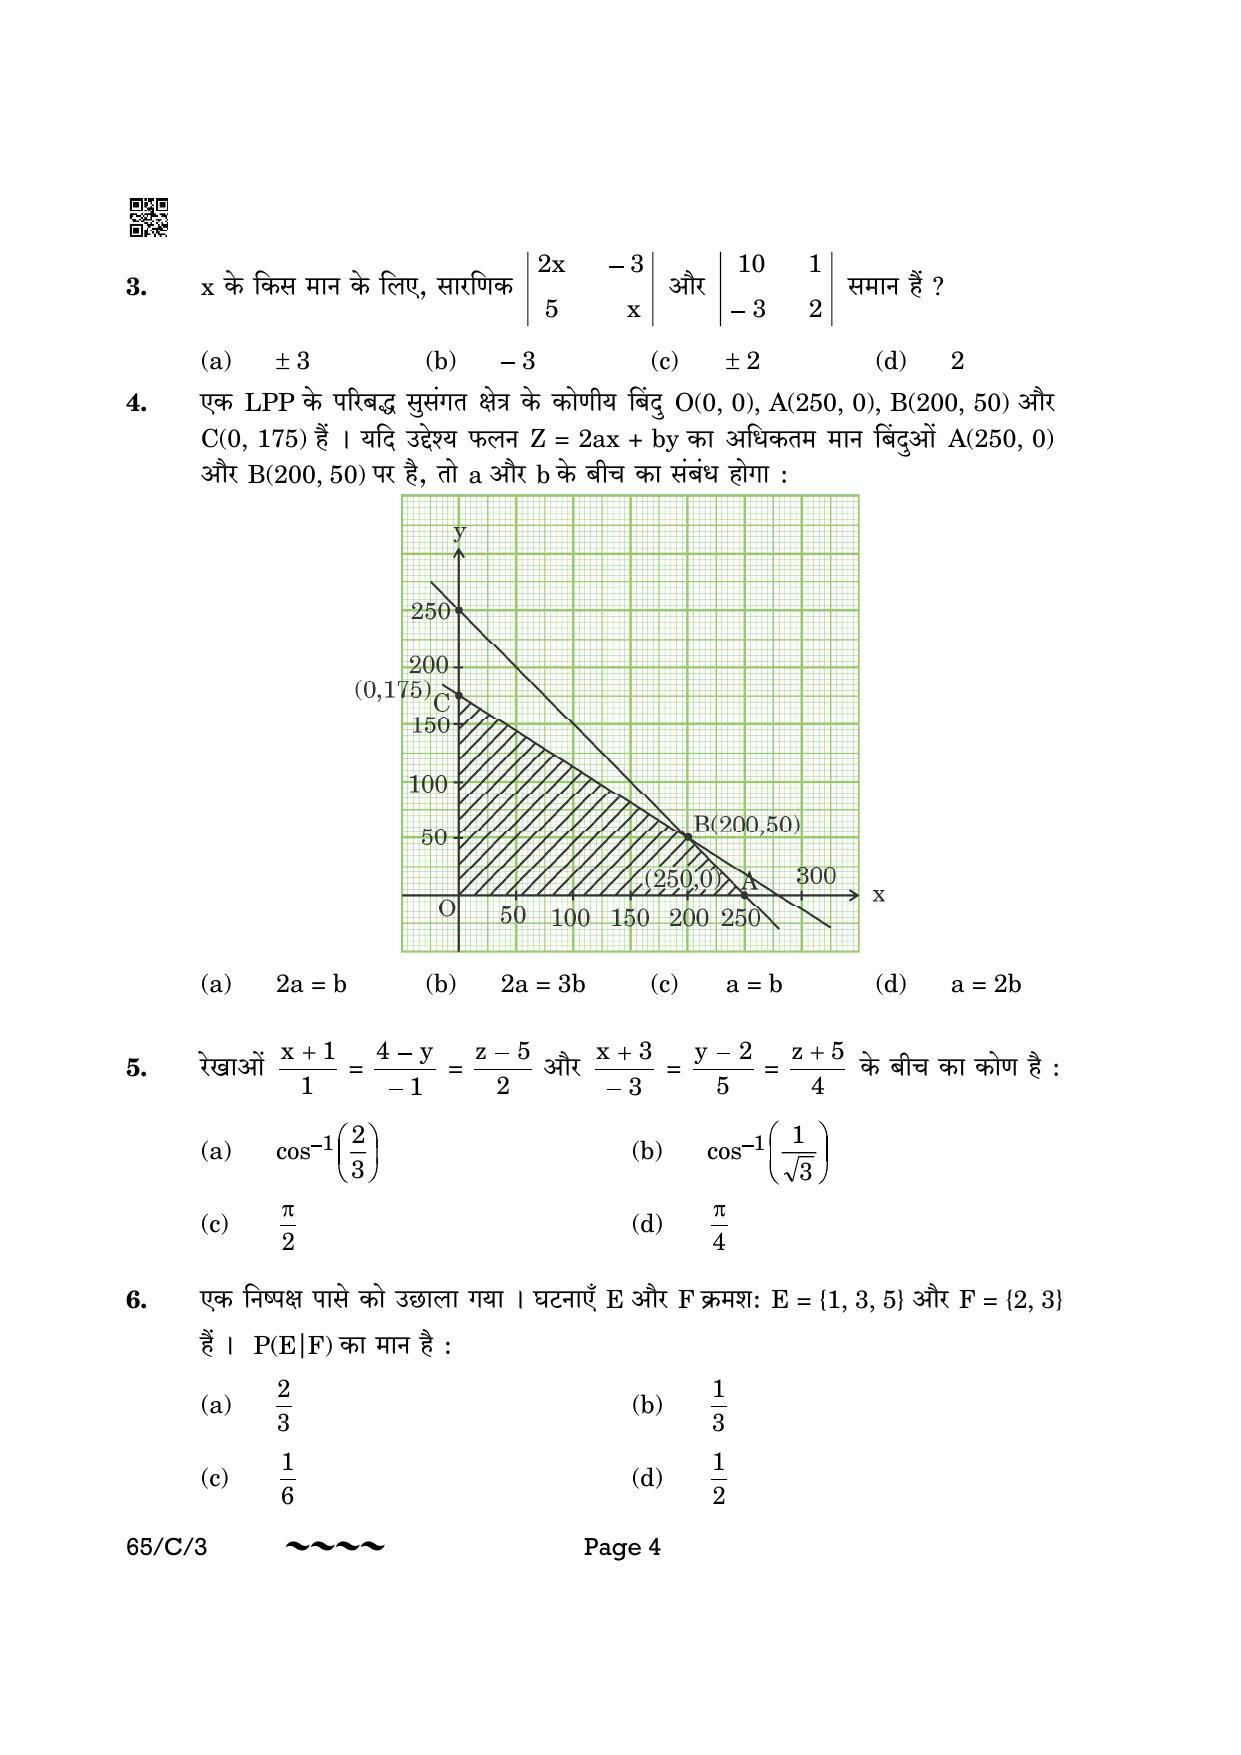 CBSE Class 12 65-3- Mathematics 2023 (Compartment) Question Paper - Page 4